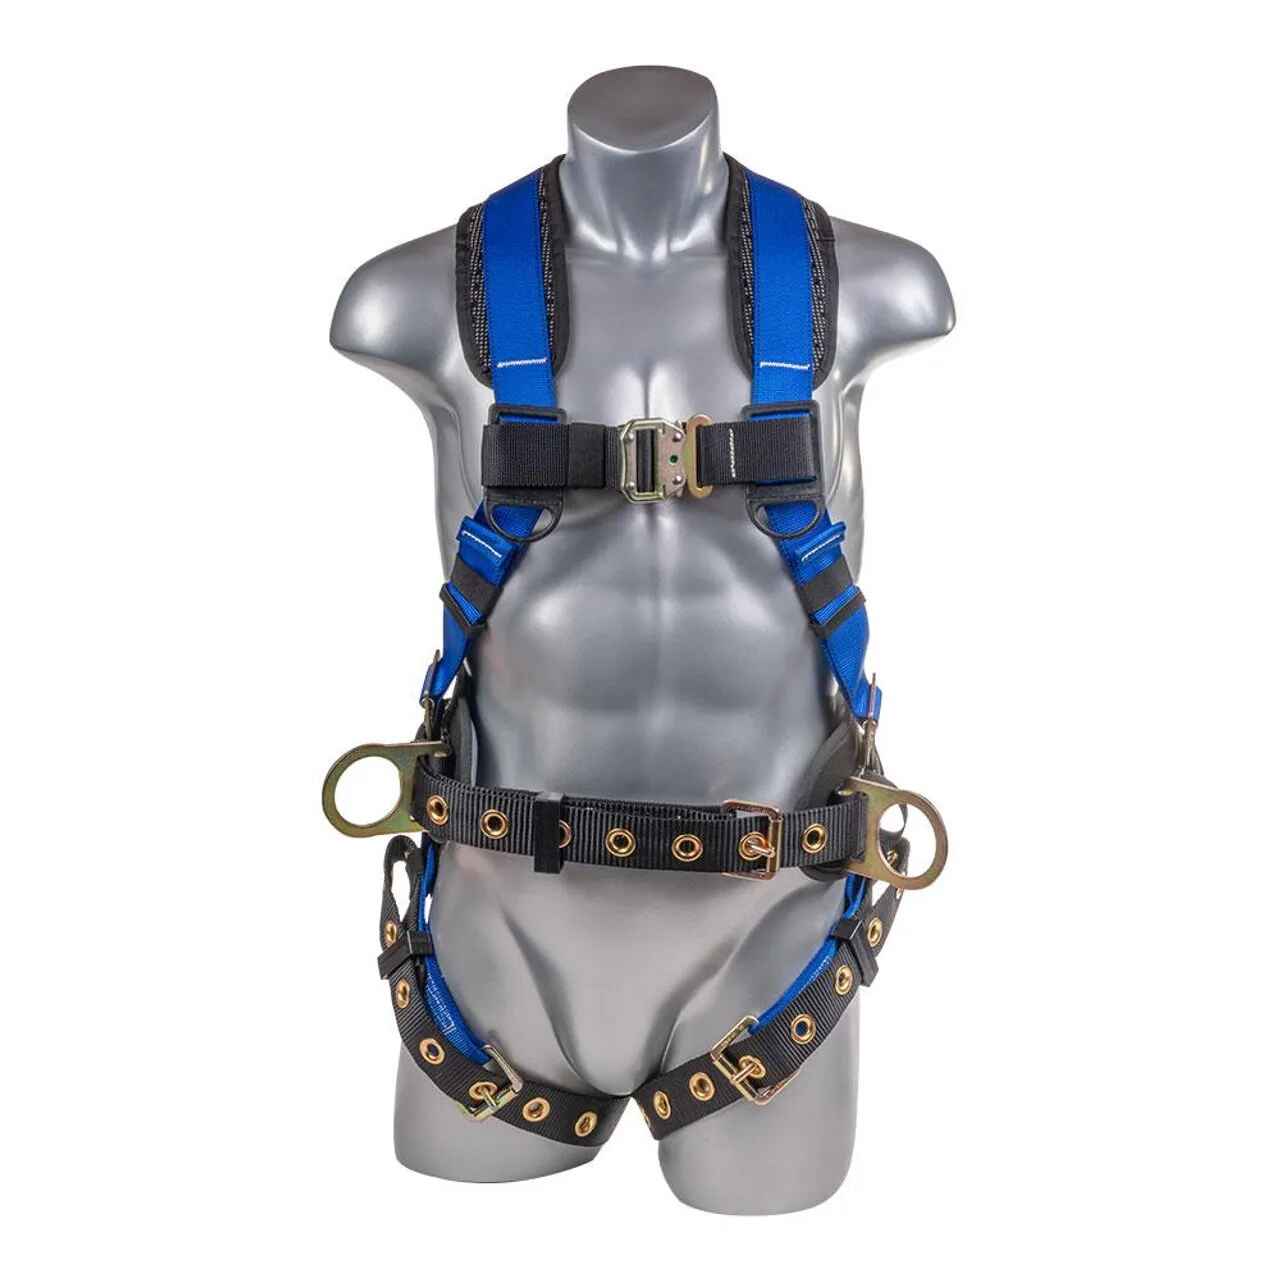 Fall Protection Full Body Safety Harness 5 Point, Back Padded, Palmer Safety, QCB, Grommet Legs, Osha Approved, Medium